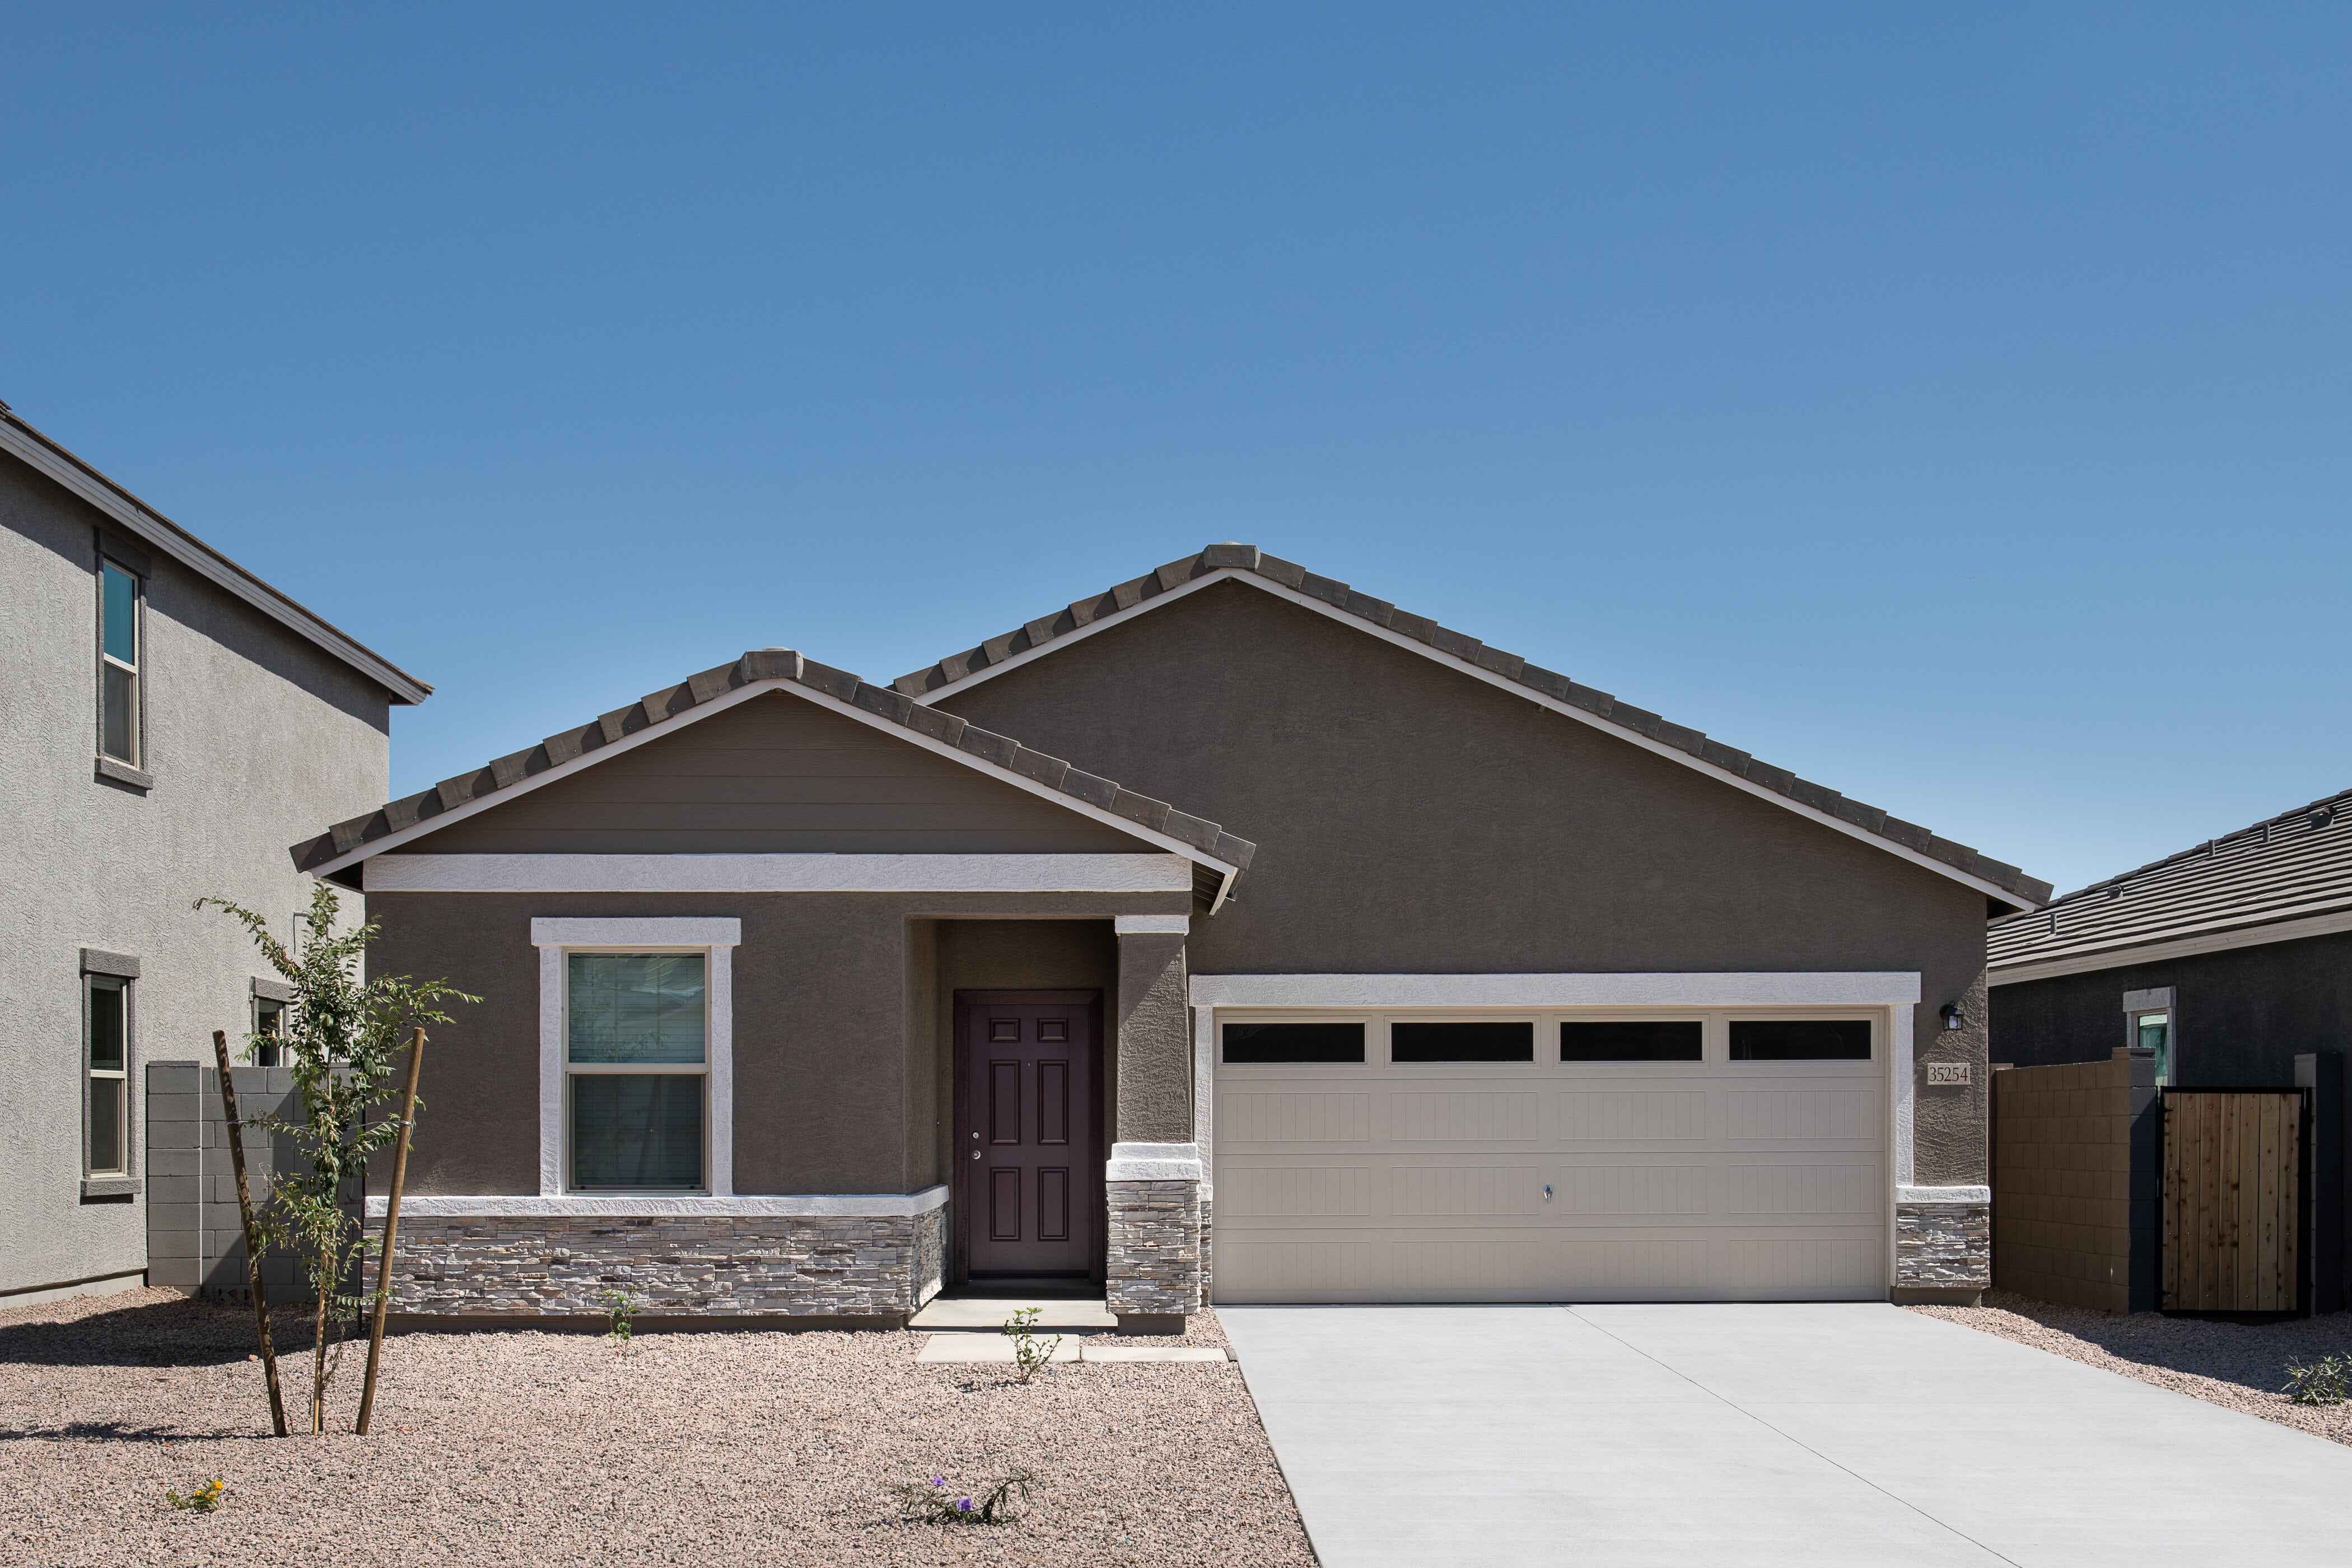 Check out our Moonbeam plan in our new Phoenix area neighborhood, Agave Trails!